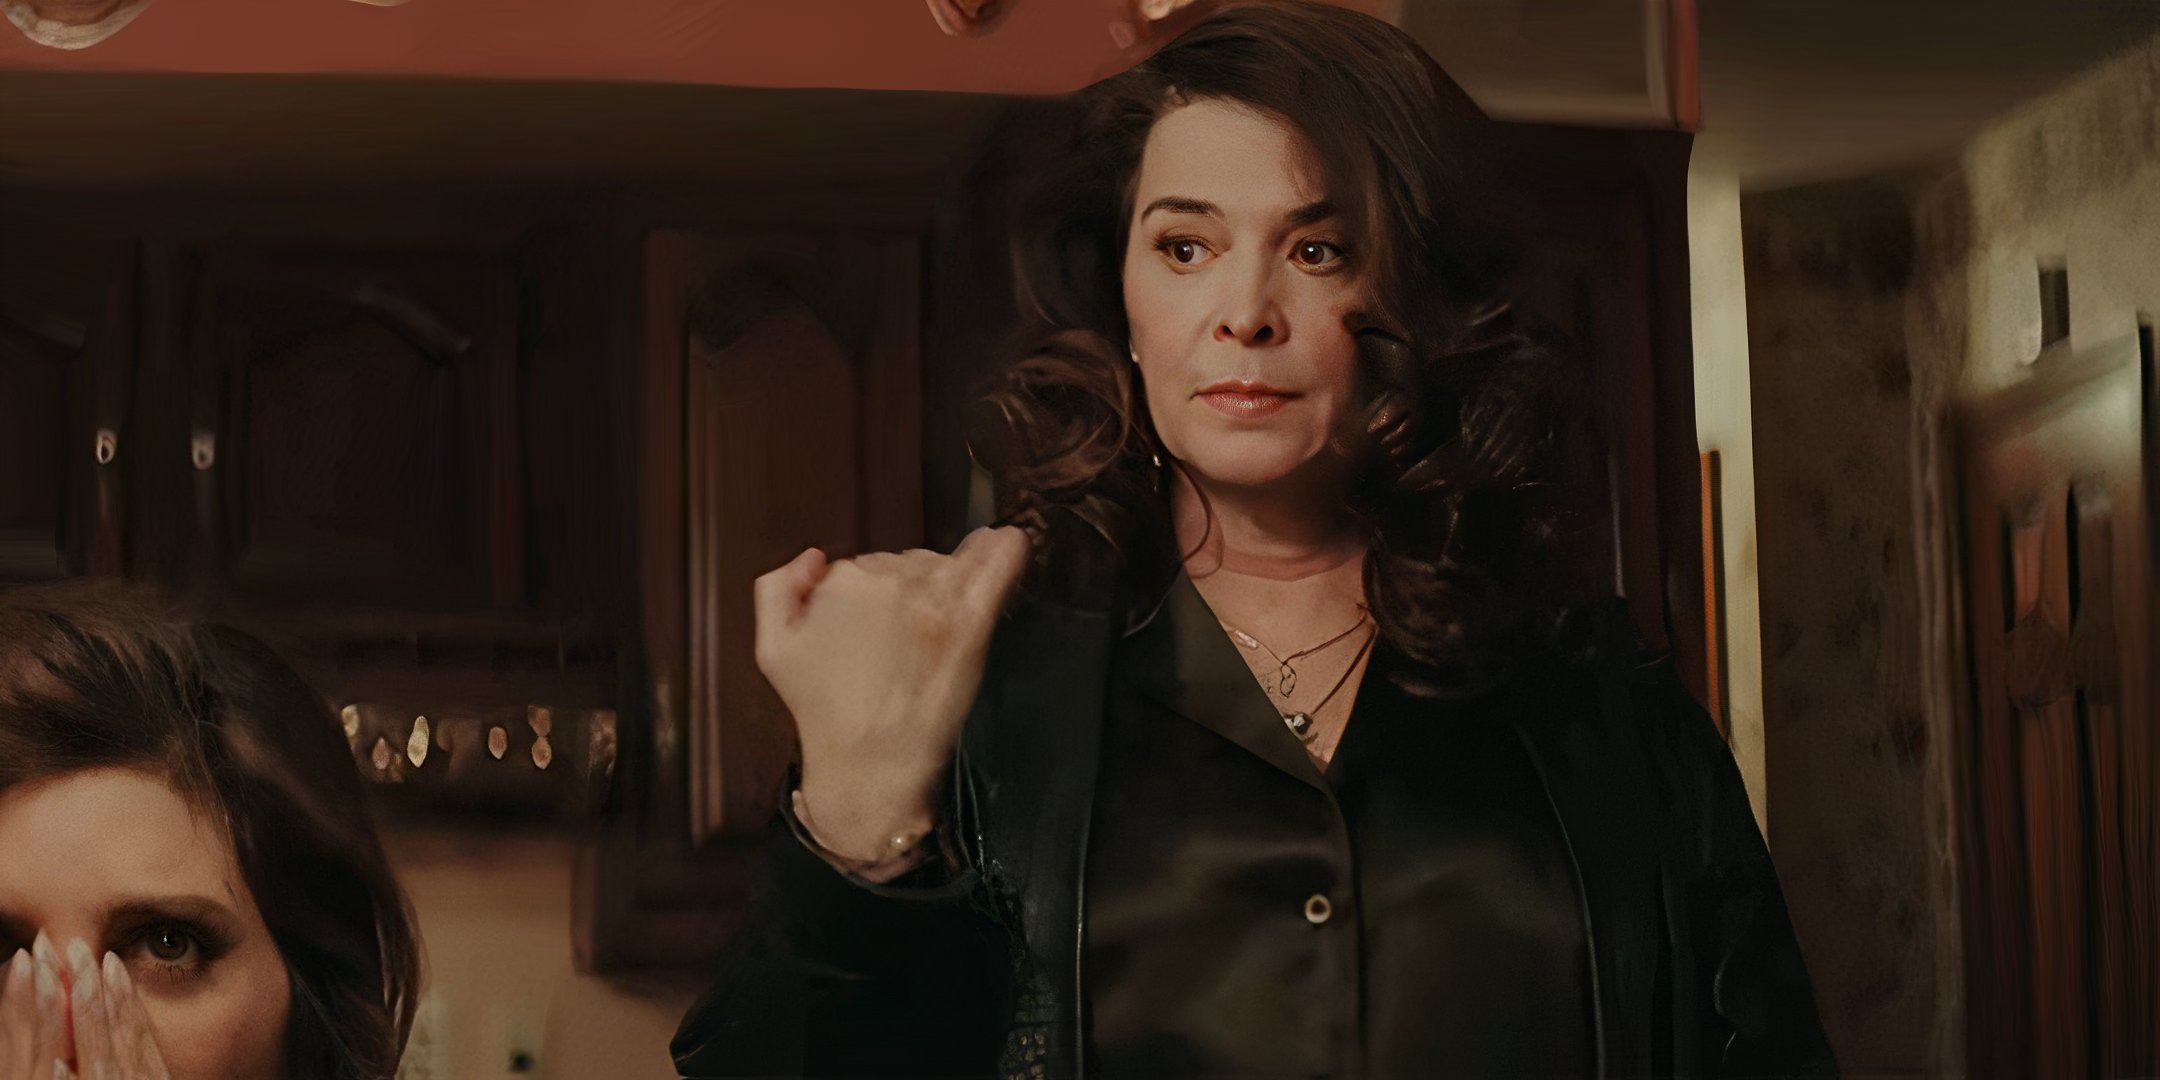 Annabella Sciorra as Christine looking upset and making a cut off motion with her hand in Fresh Kills